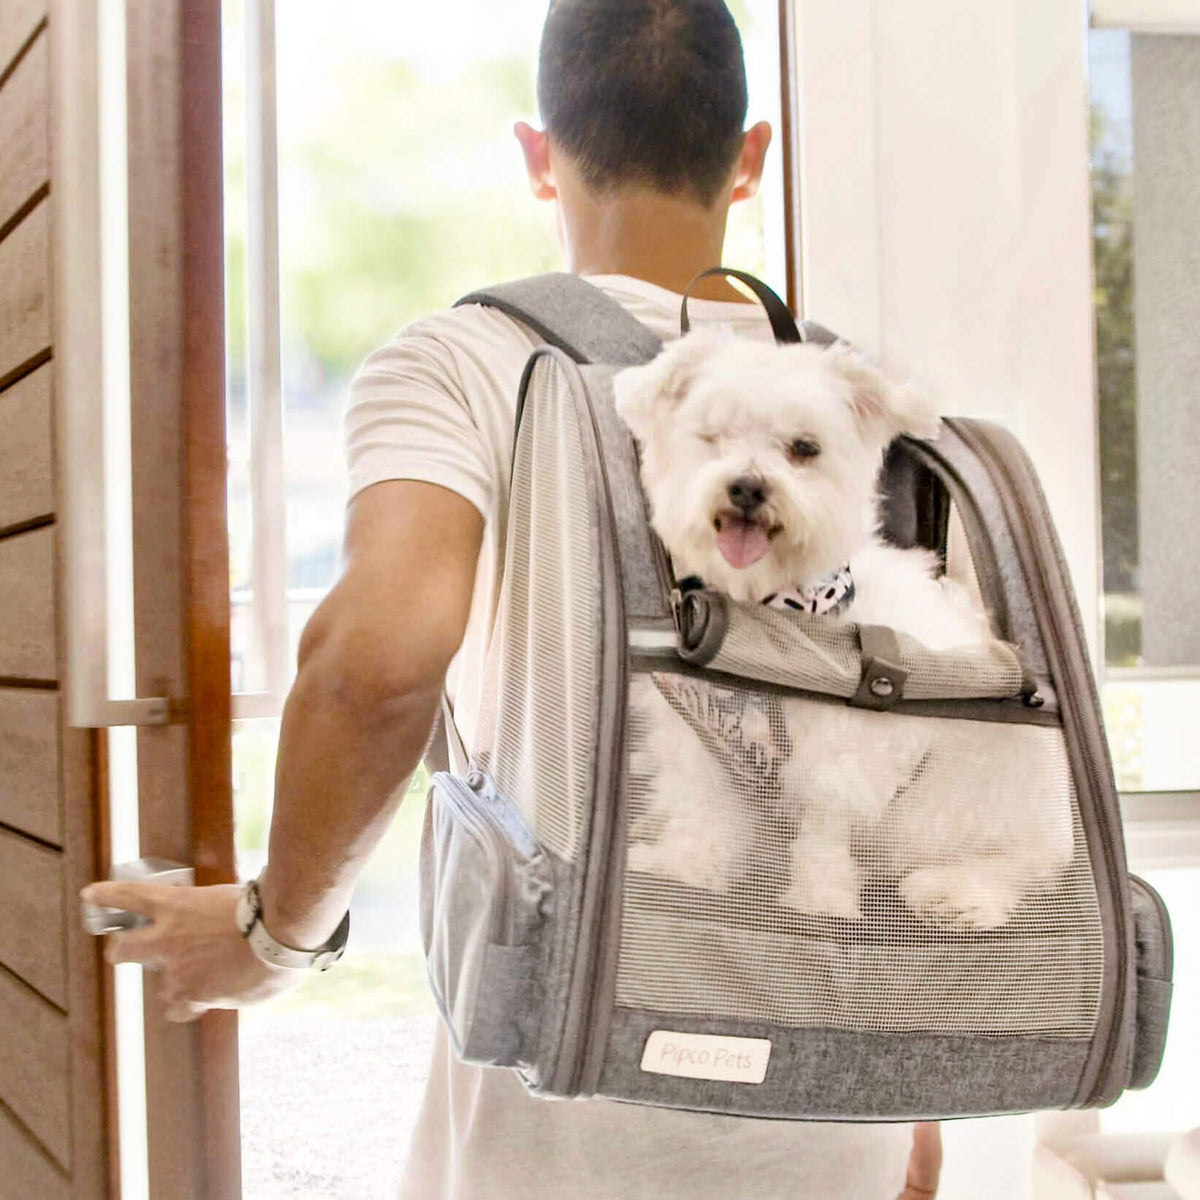 Dog owner carrying senior dog with arthritis in Pipco Pack dog backpack